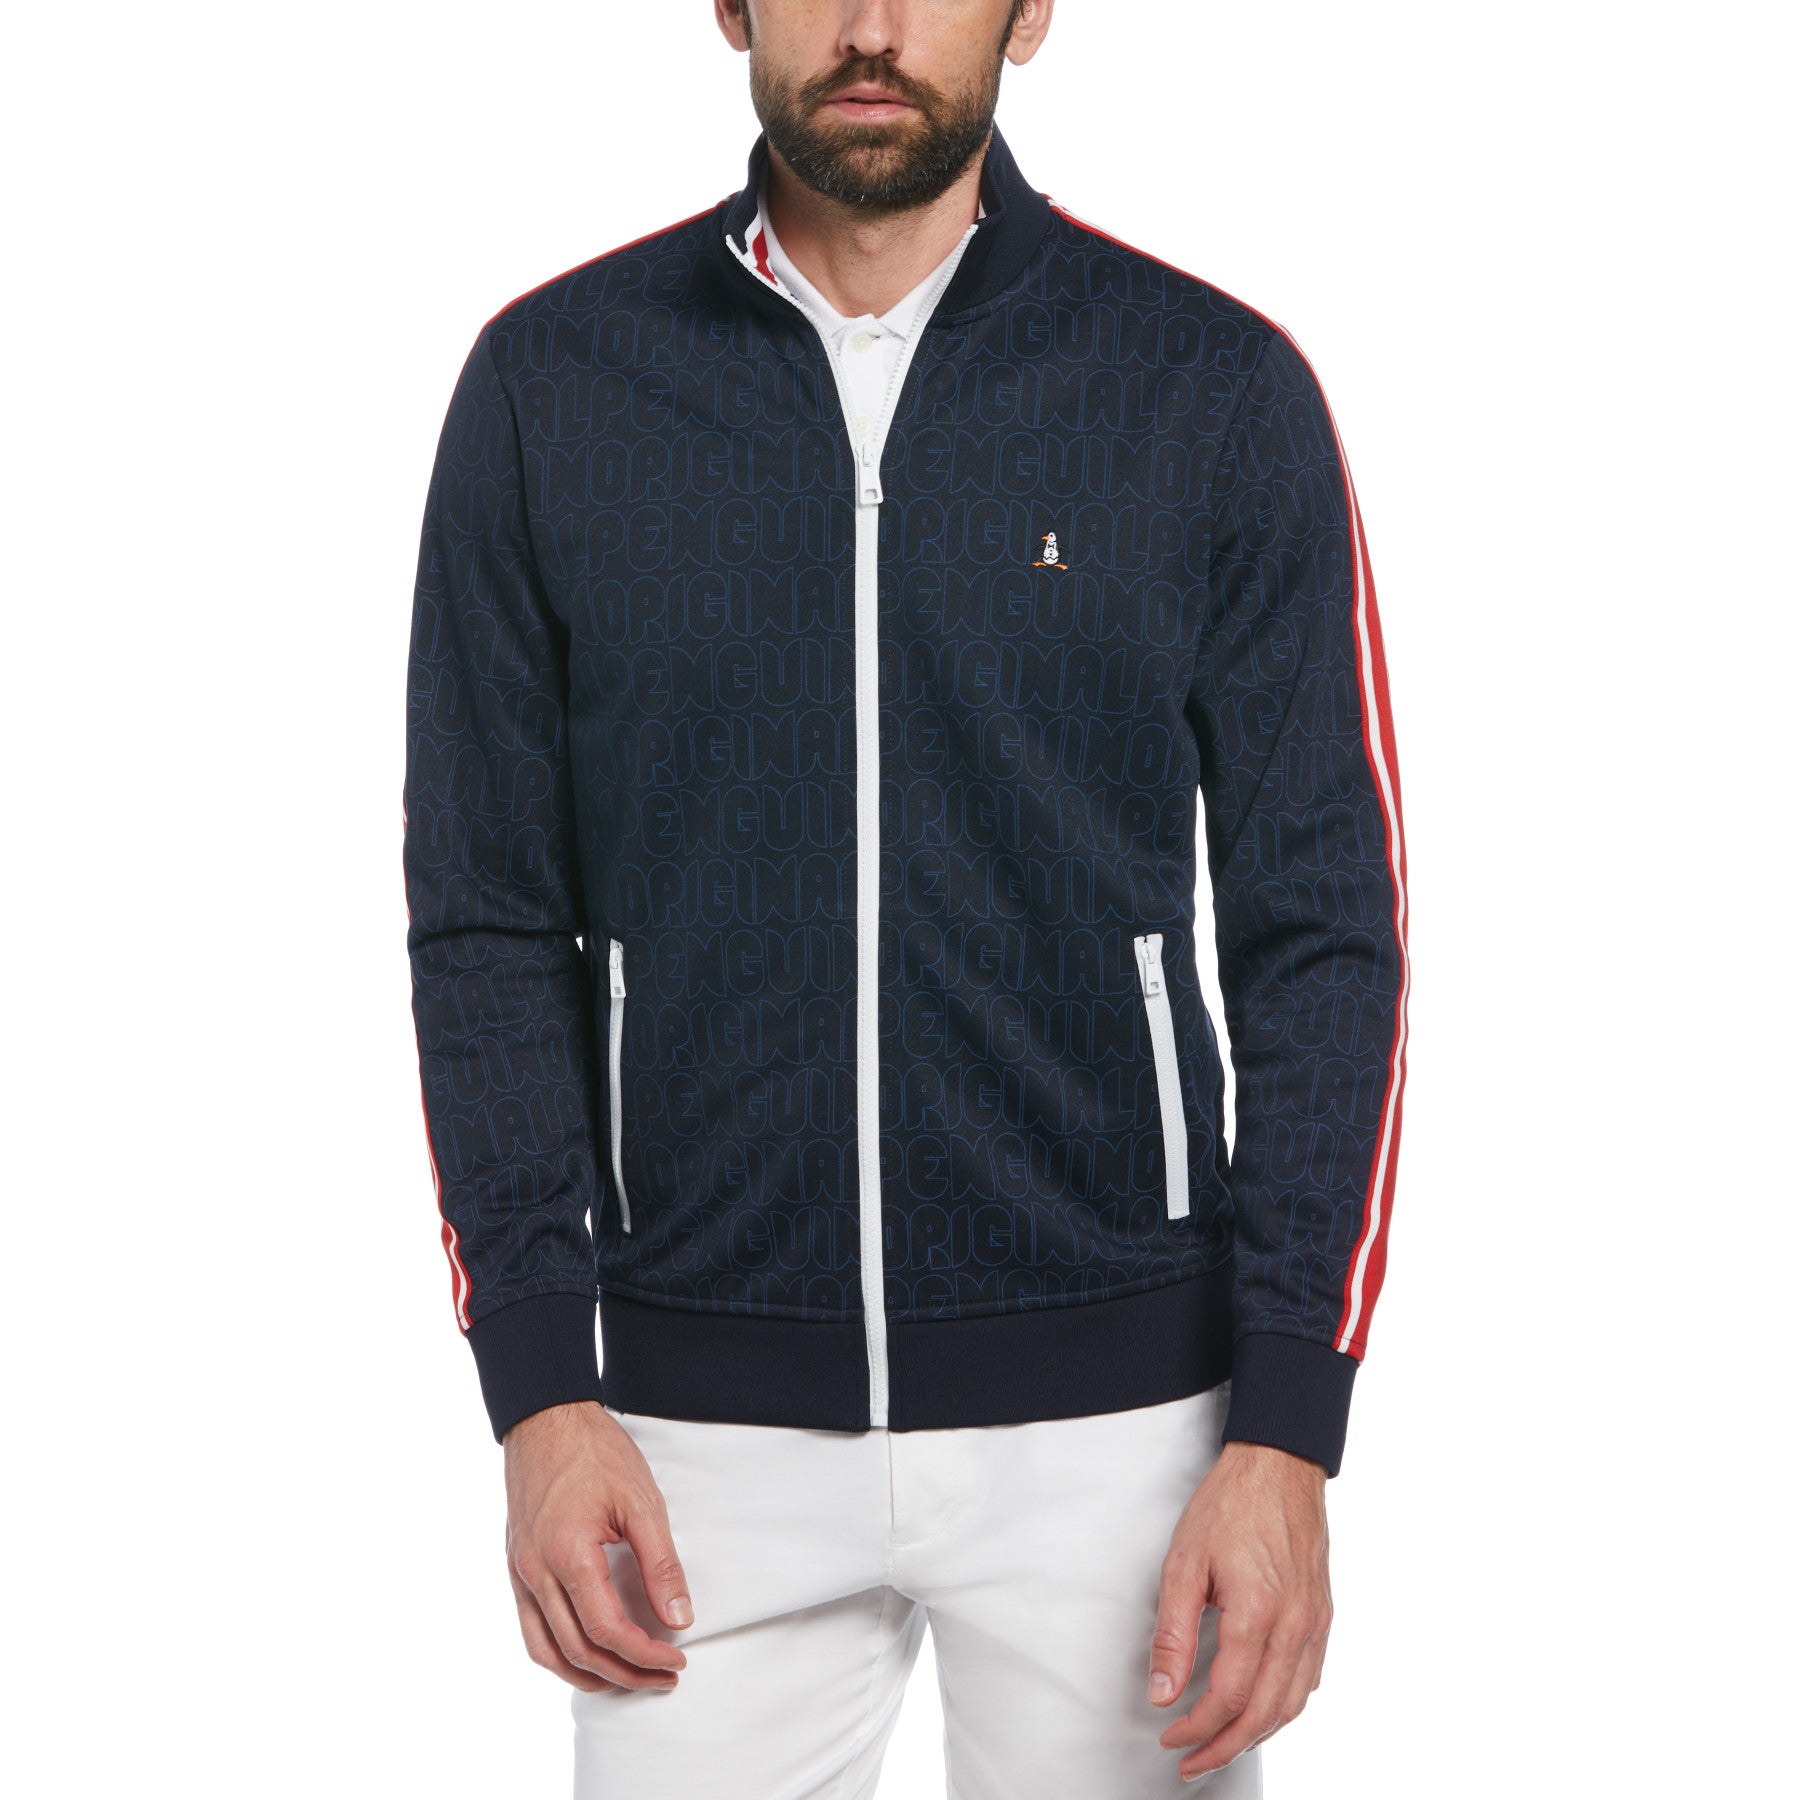 View Double Knit Logo Track Jacket In Dark Sapphire information